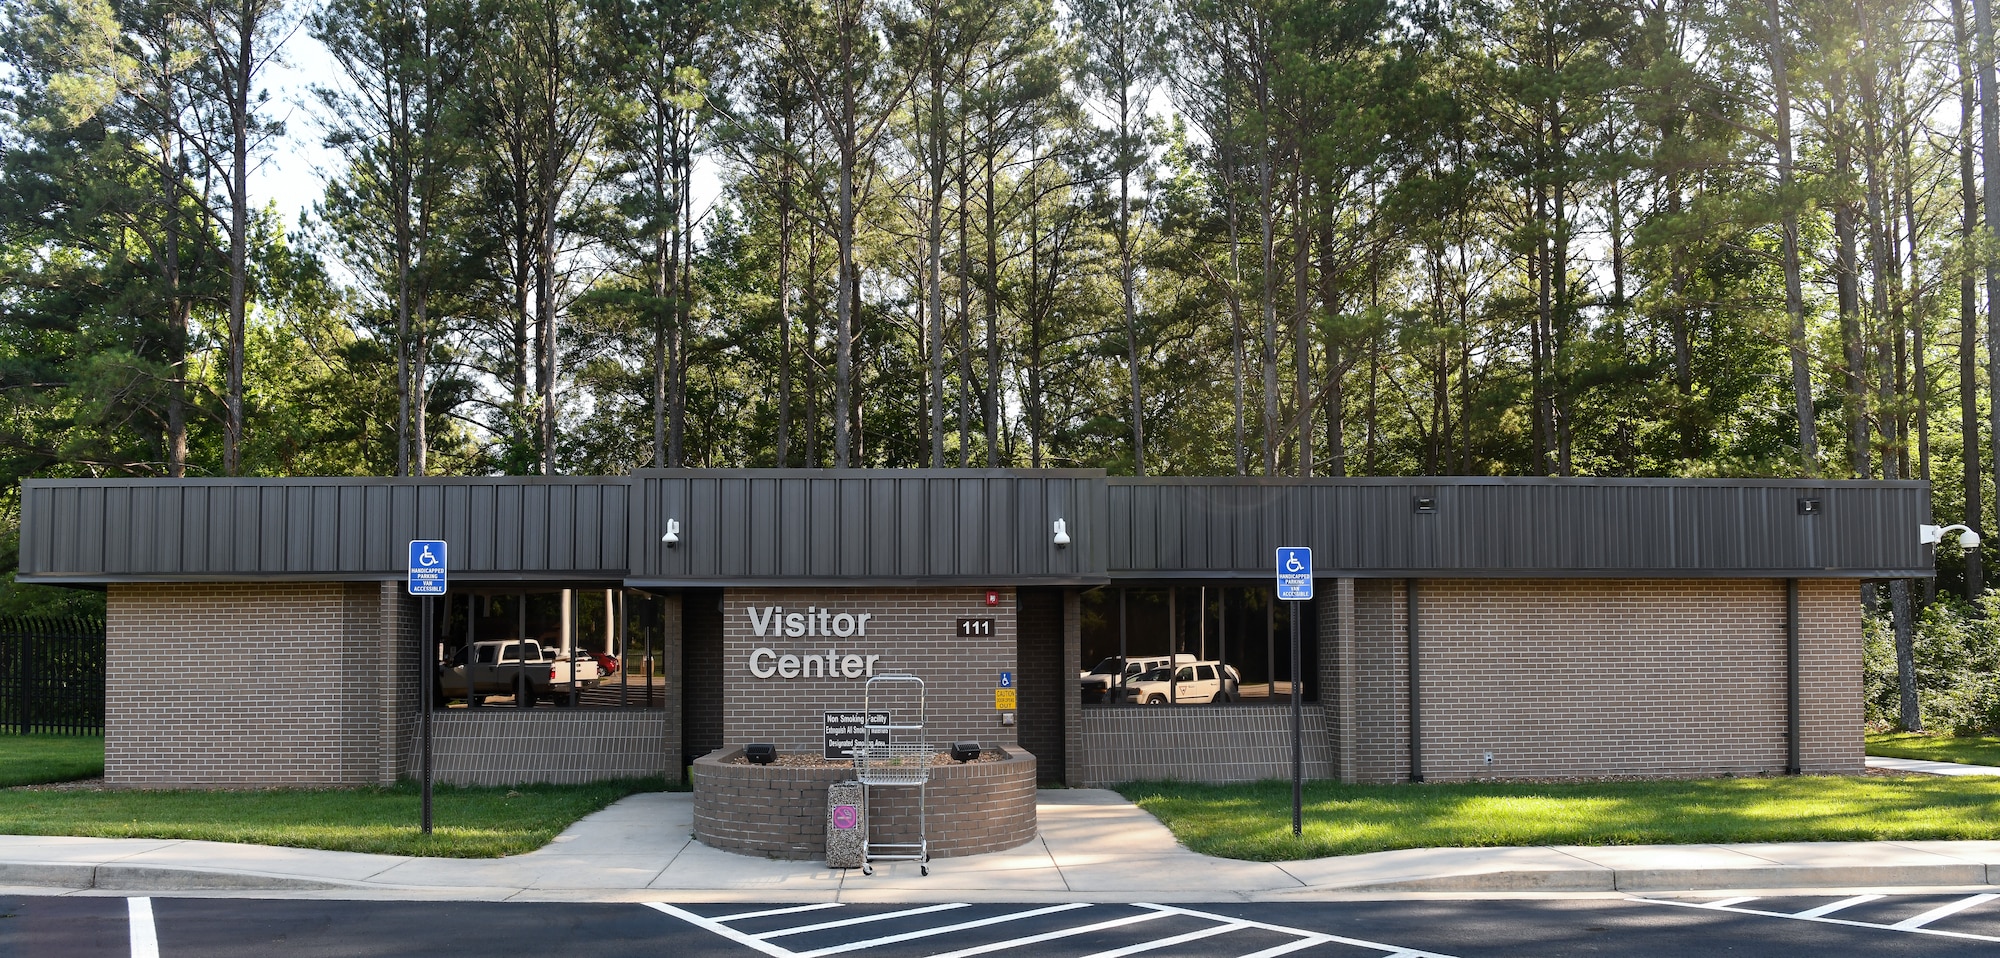 A renovation to the Visitor Control Center, shown here July 7, 2020, at Arnold Air Force Base, Tenn. expanded the facility and upgraded the interior and systems in the existing section. (U.S. Air Force photo by Jill Pickett)